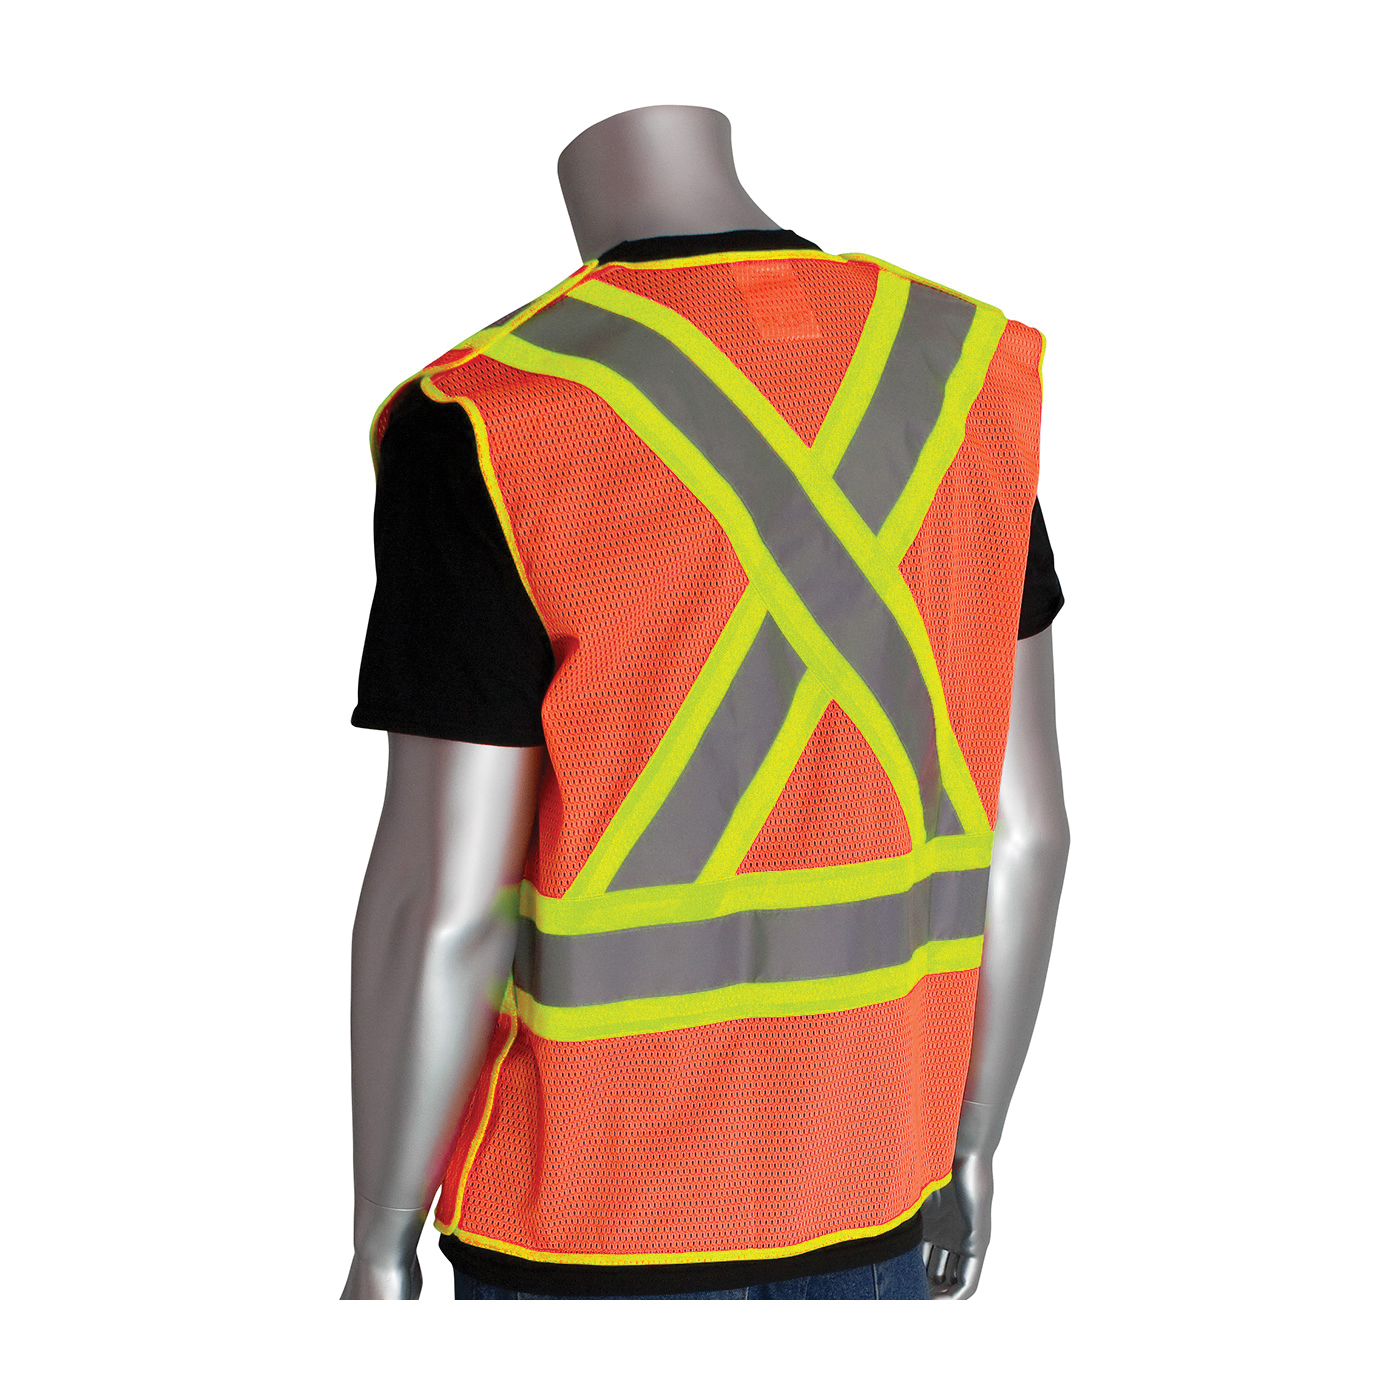 PIP® 302-0211-OR/5X 2-Tone X-Back Safety Vest, 5XL, Hi-Viz Orange, Polyester Mesh, Hook and Loop Closure, 5 Pockets, ANSI Class: Class 2, Specifications Met: ANSI 107 Type R, CAN/CSA Z96